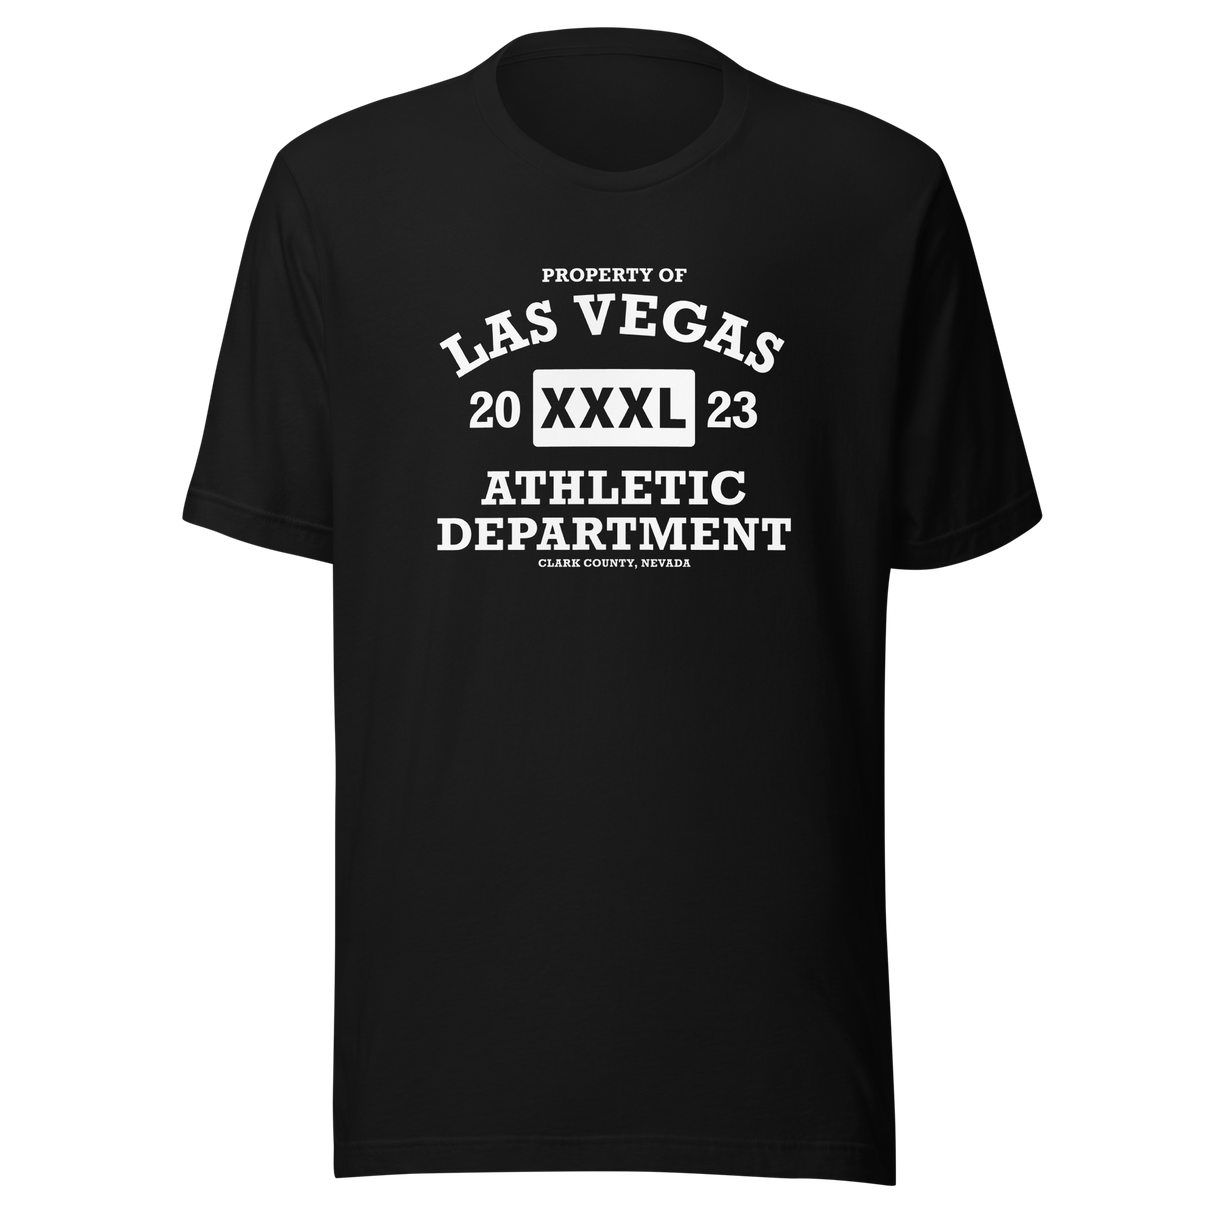 property-of-las-vegas-athletic-department-las-vegas-tee-nevada-t-shirt-fitness-tee-gym-t-shirt-workout-tee#color_black